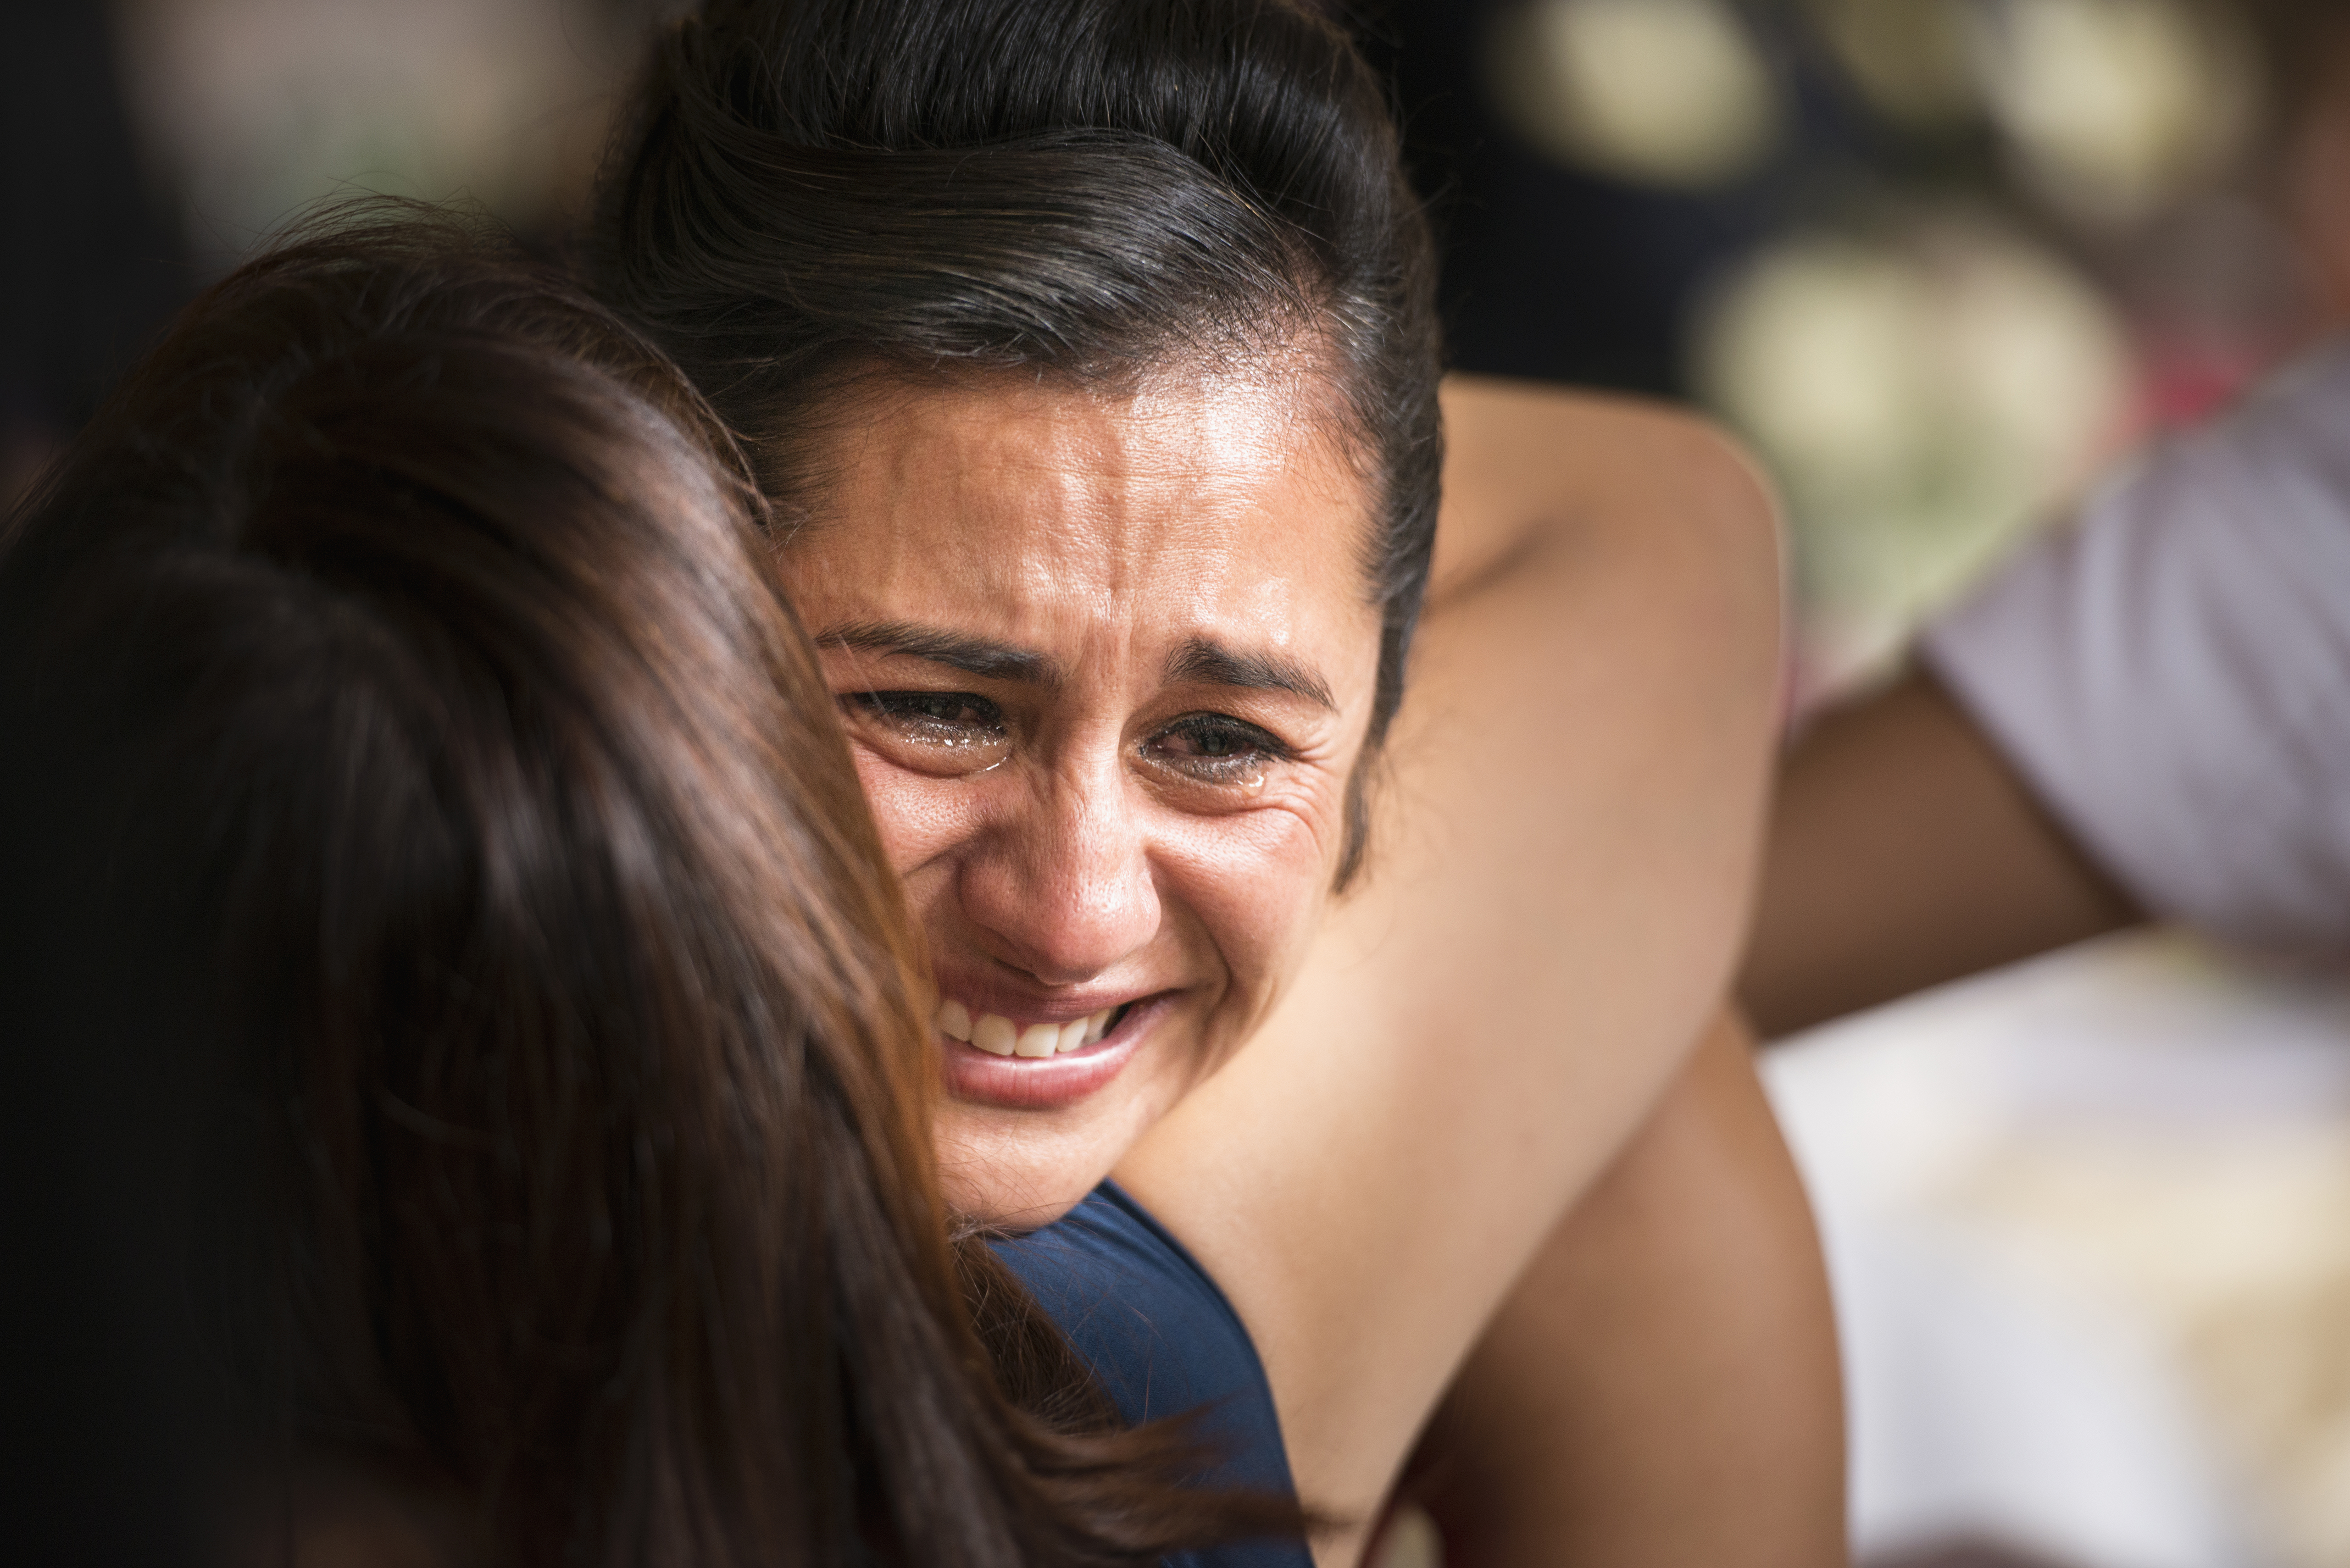 A woman hugging another crying woman | Source: Getty Images